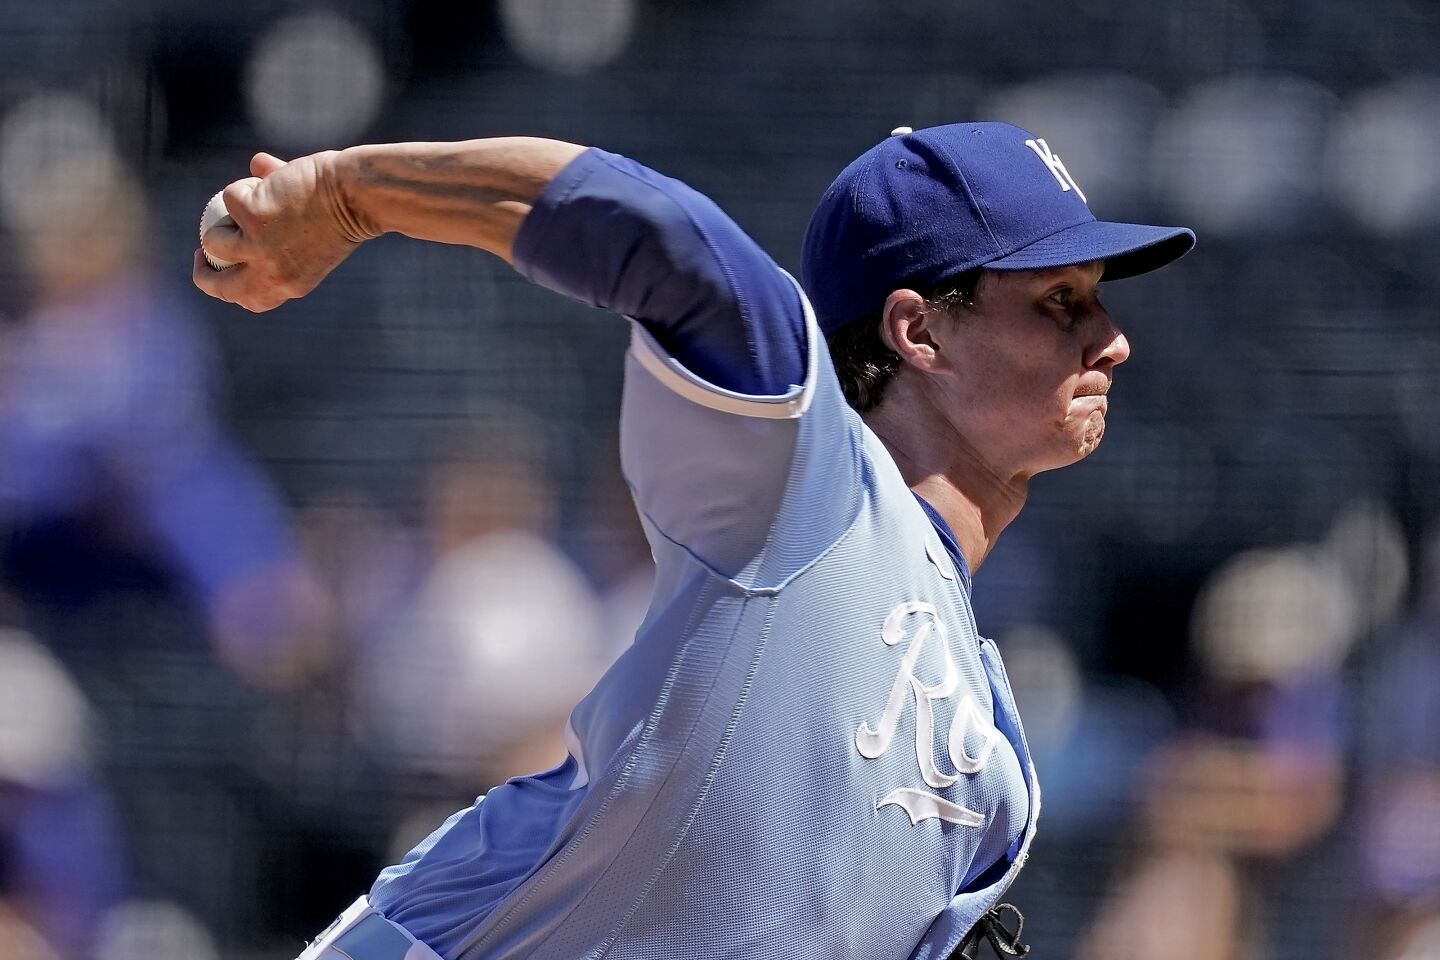 25 | Kansas City Royals (48-68; LW: 26)A developing stopper: 26-year-old Brady Singer put a stop to the Dodgers’ 12-game winning streak with six shutout innings of one-hit ball on Sunday.